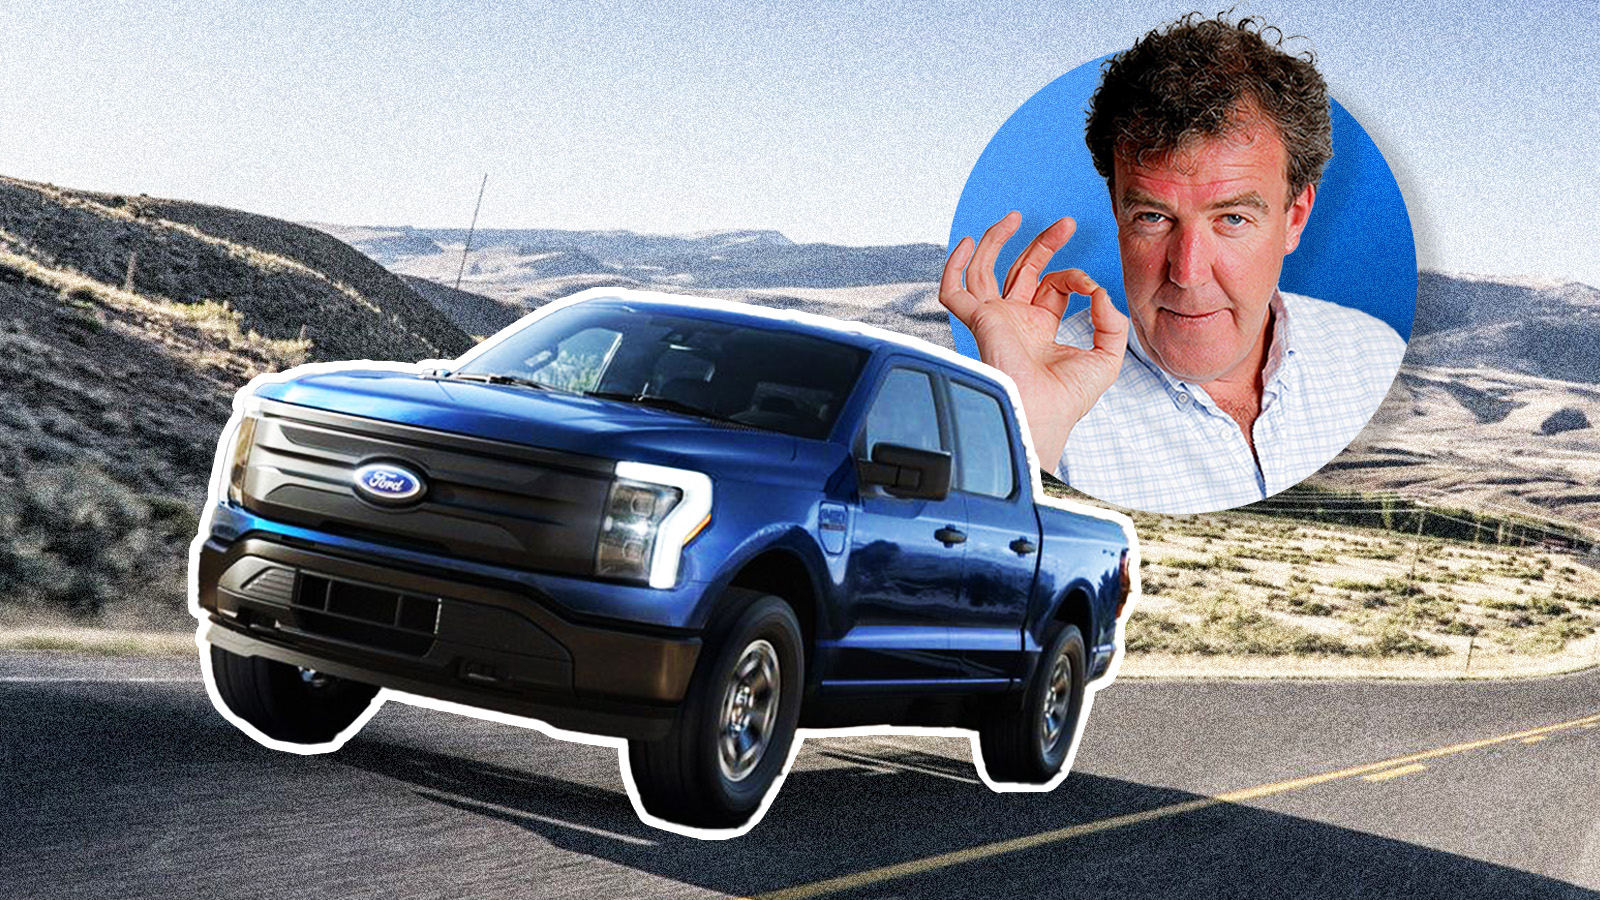 EV Hater Jeremy Clarkson Admits He’s ‘Fallen In Love’ With An Electric Car